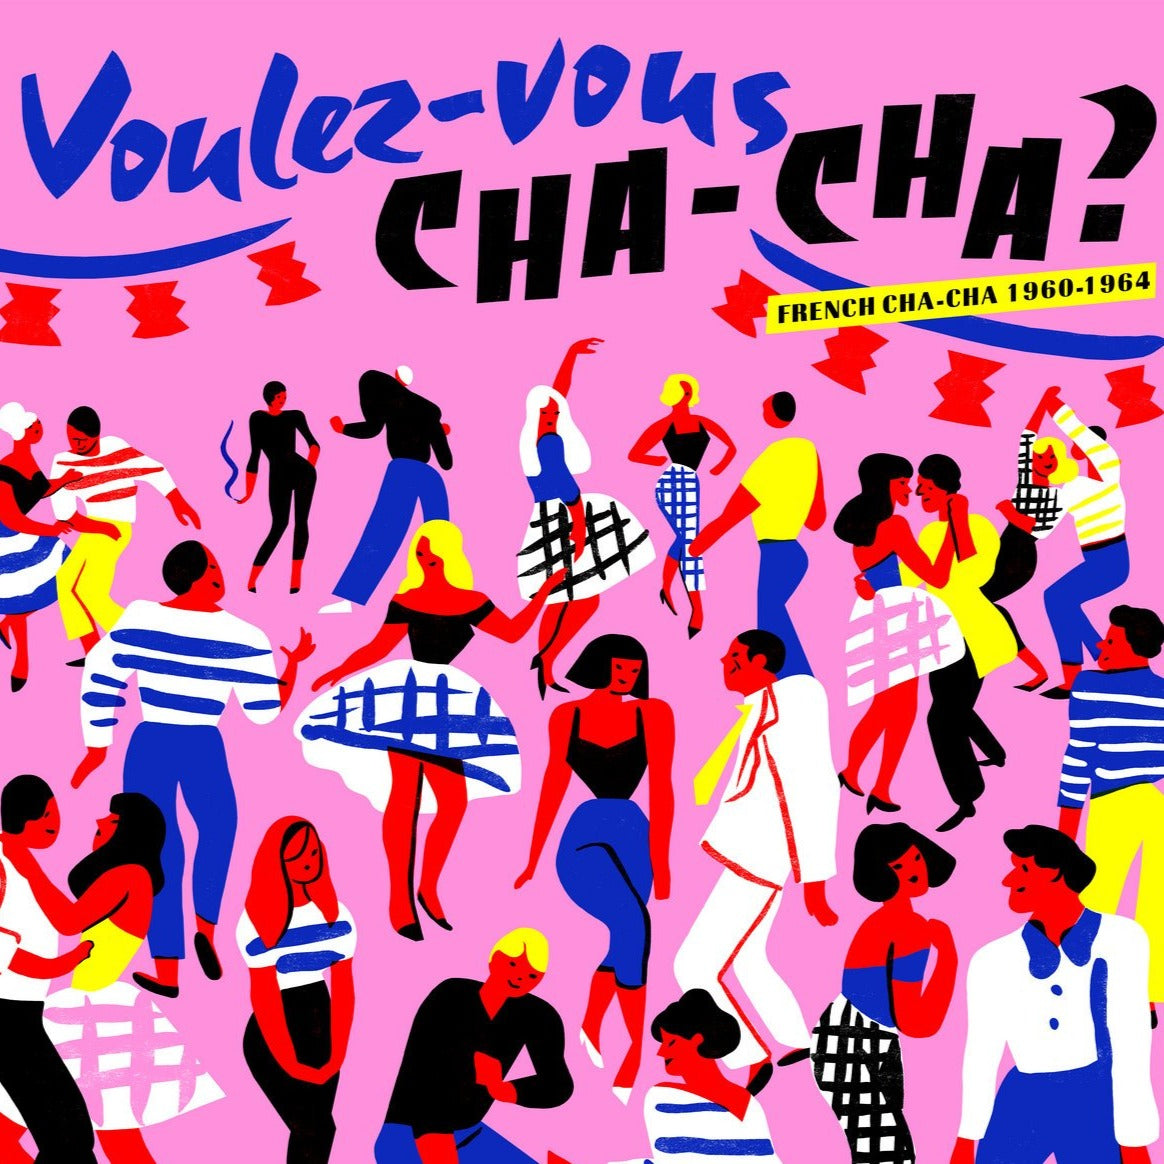 Voulex Vous Cha-Cha French Chacha 1960 - 1964 (New LP)